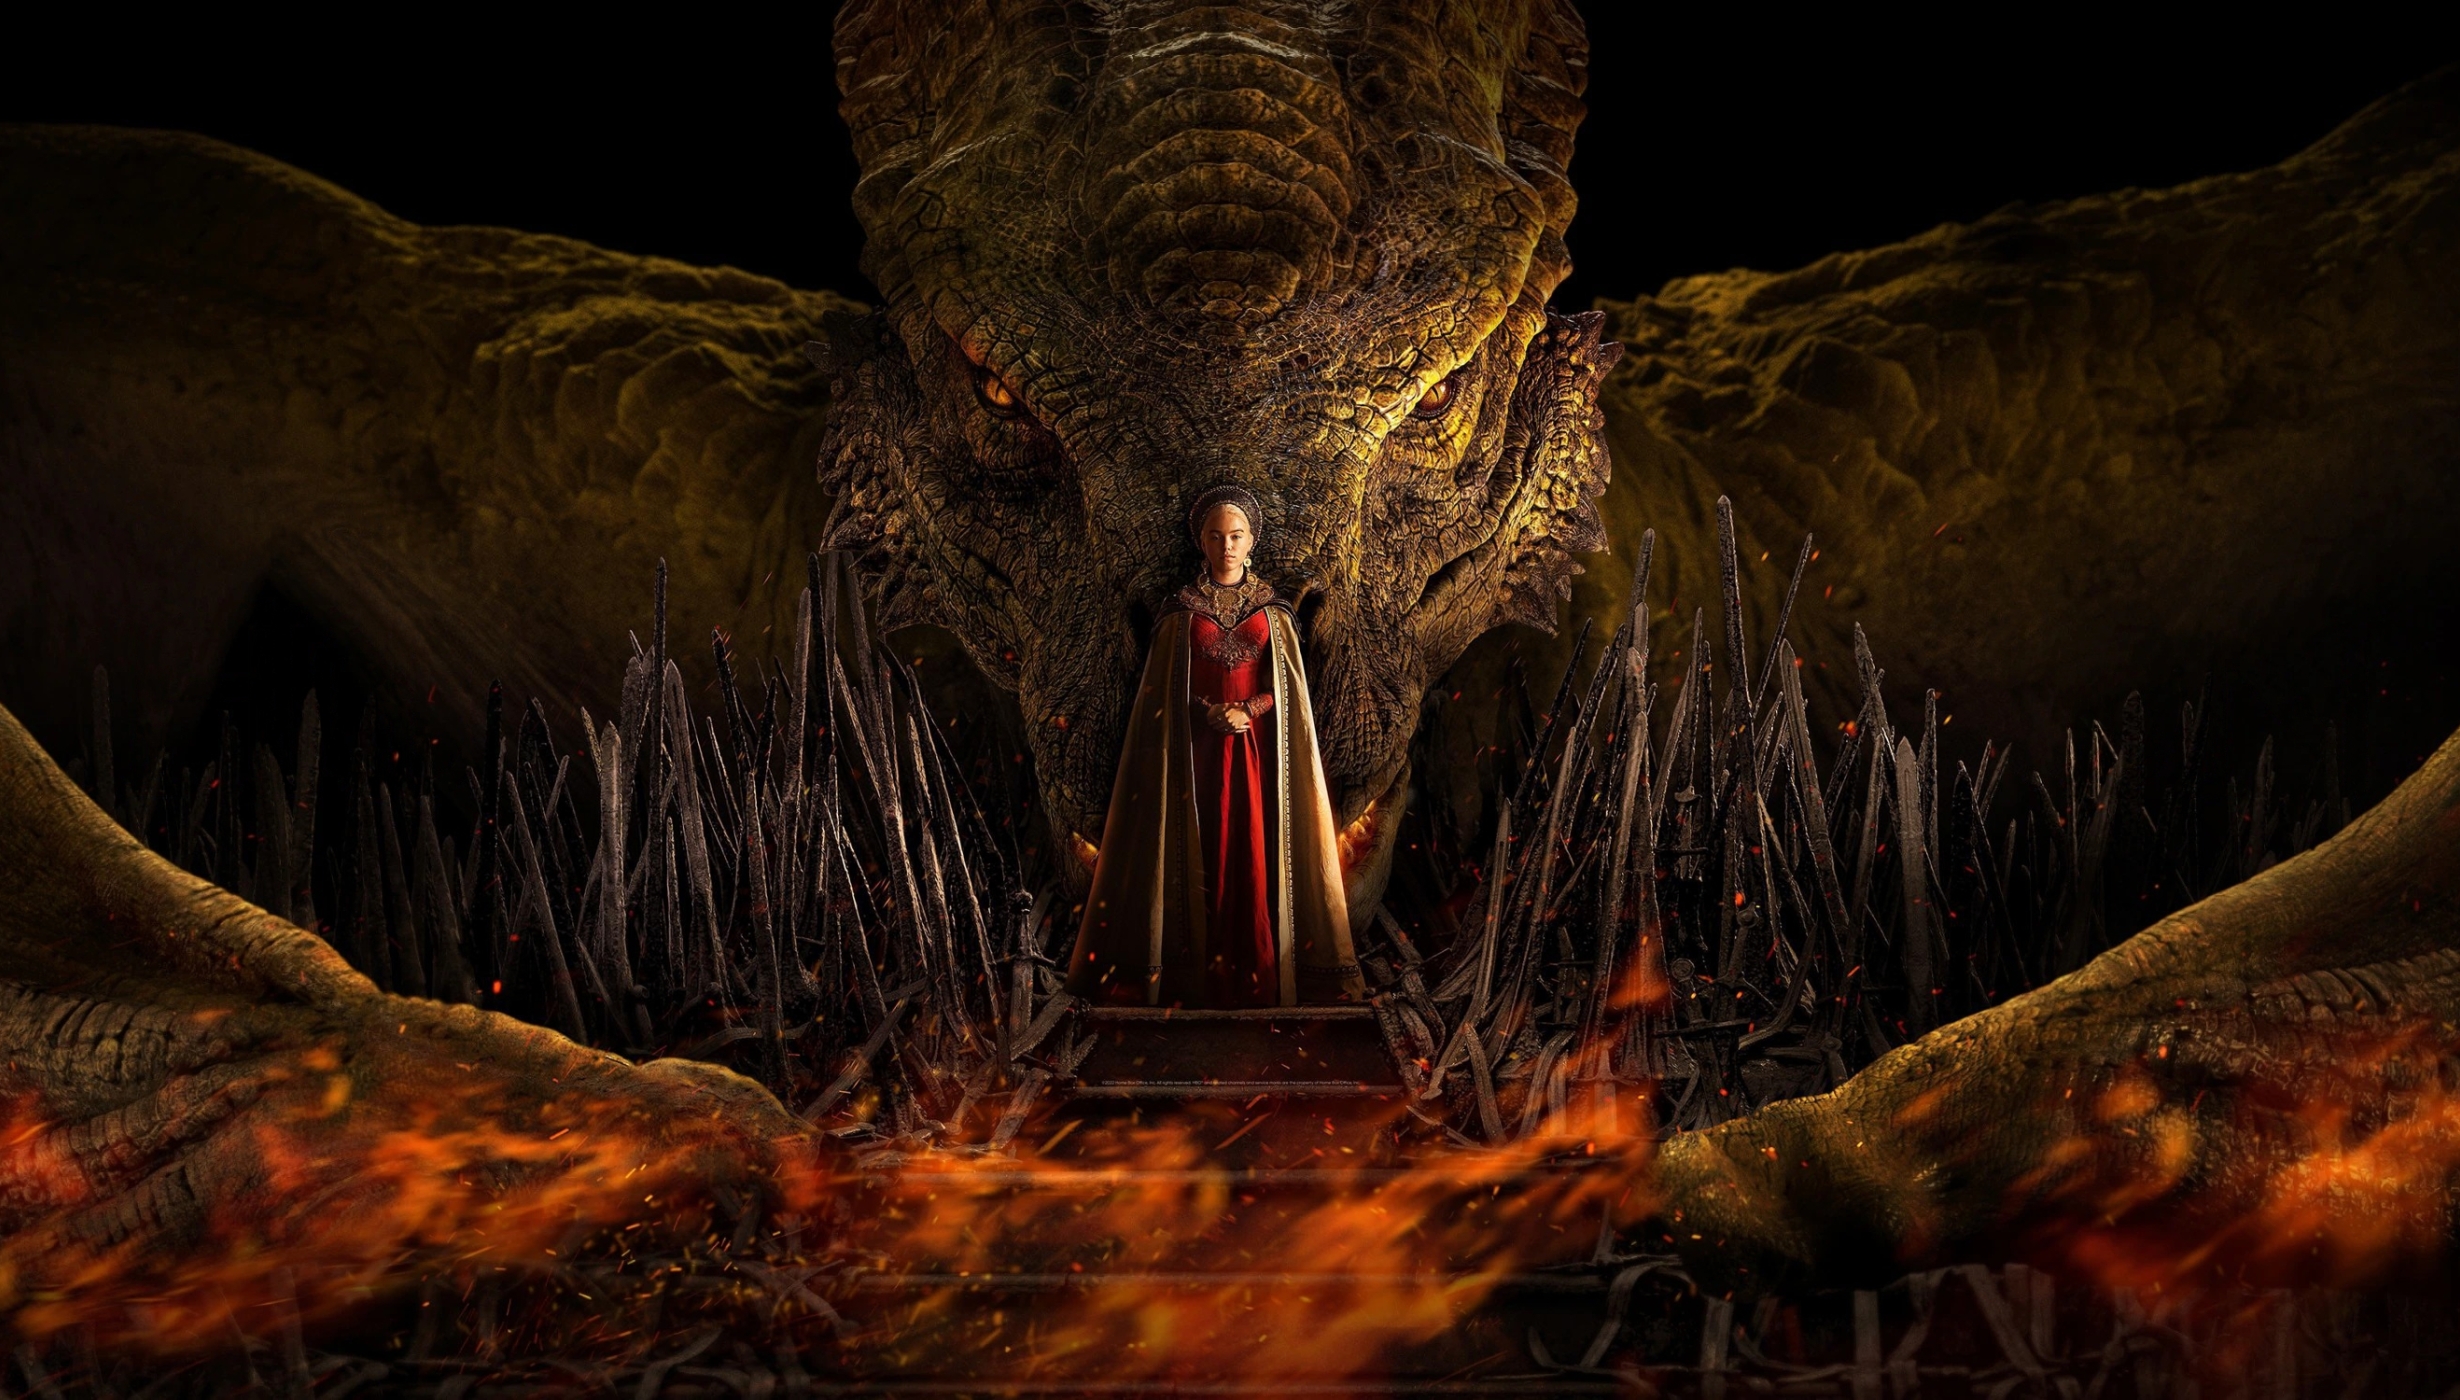 2460x1400 Poster Of House Of The Dragon 2460x1400 Resolution Wallpaper